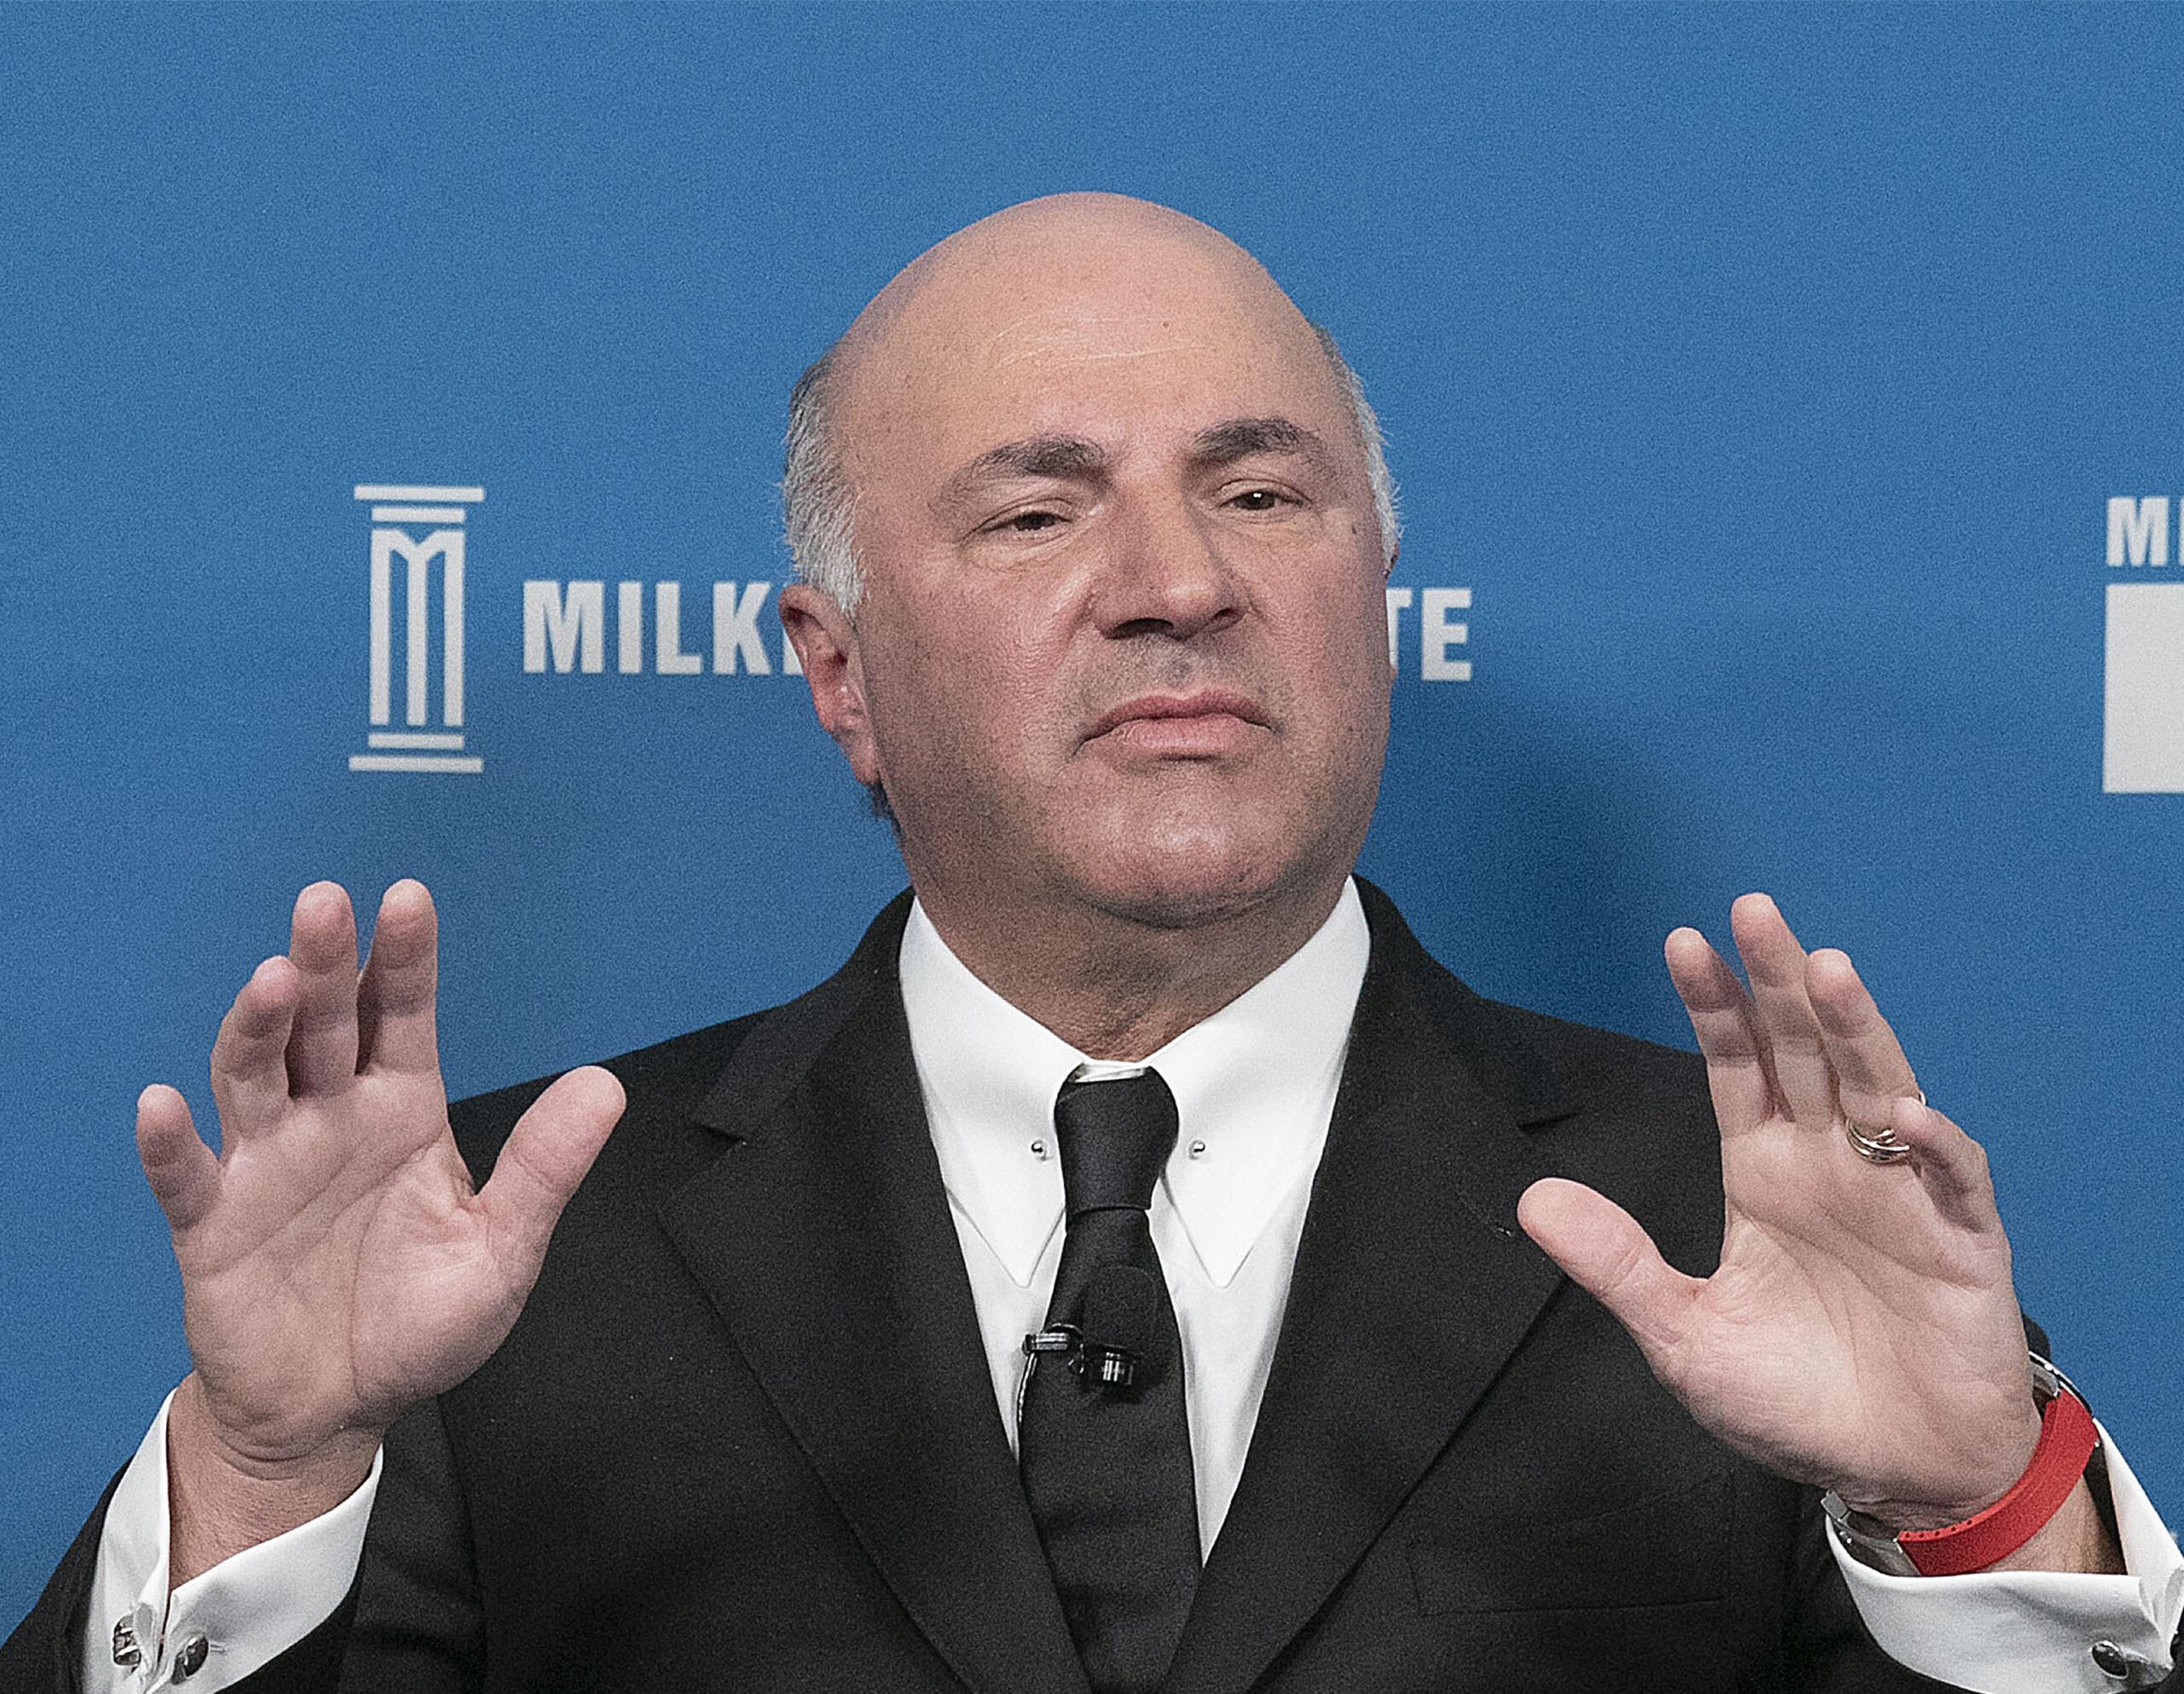 Donald Trump Praises 'Shark Tank' Star For Vowing To Not Invest In 'Loser' State New York Over $355M Fine